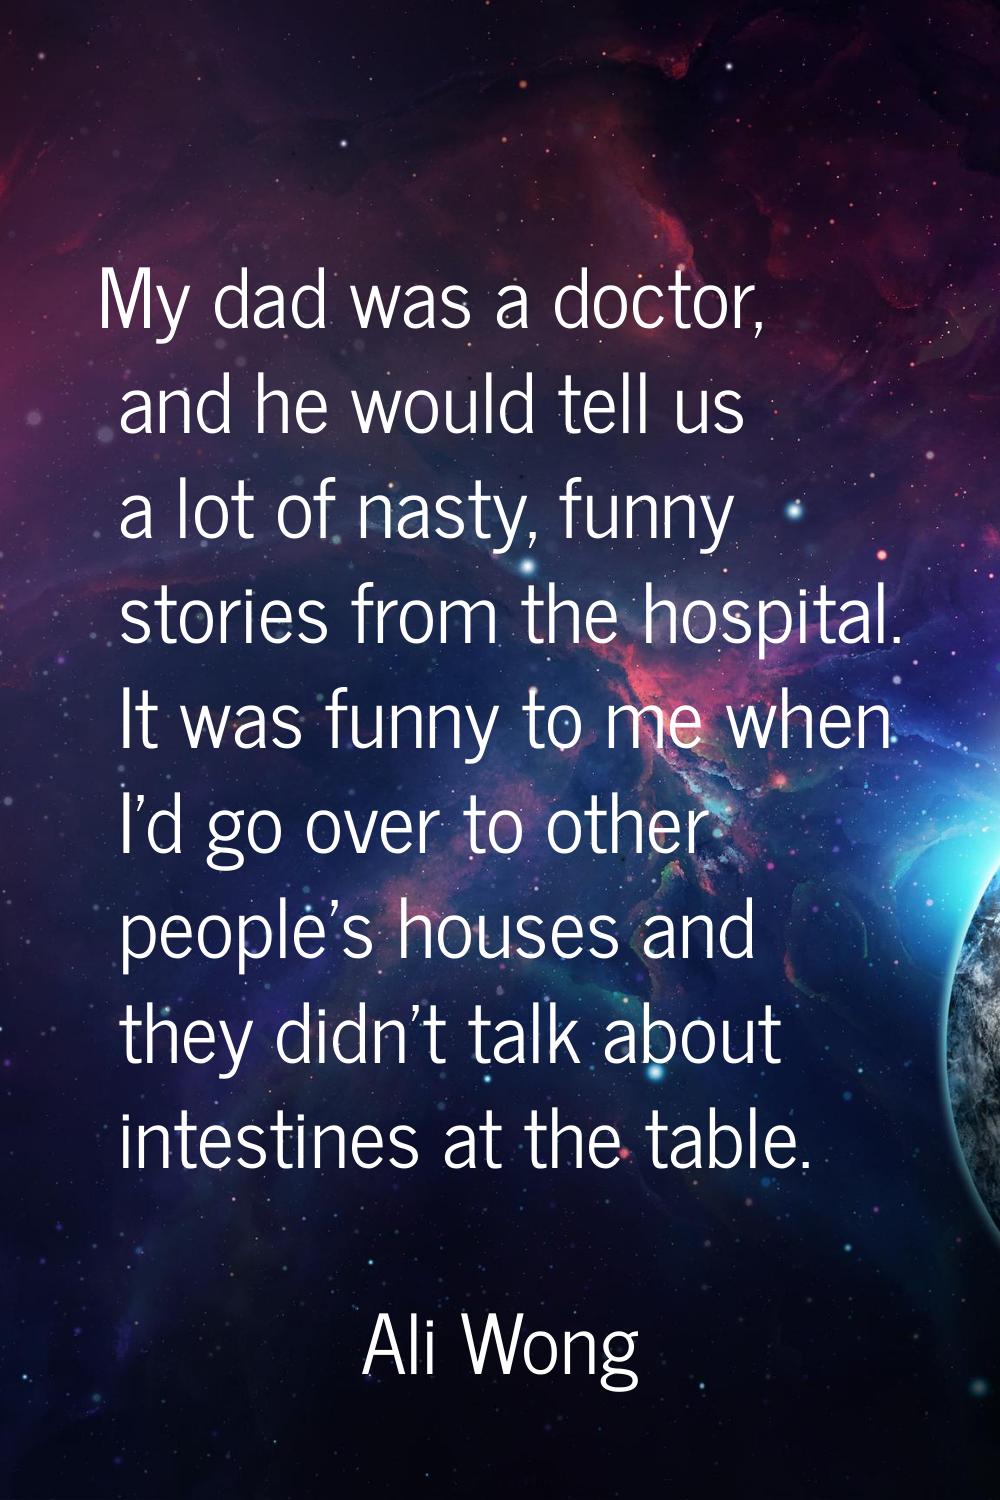 My dad was a doctor, and he would tell us a lot of nasty, funny stories from the hospital. It was f